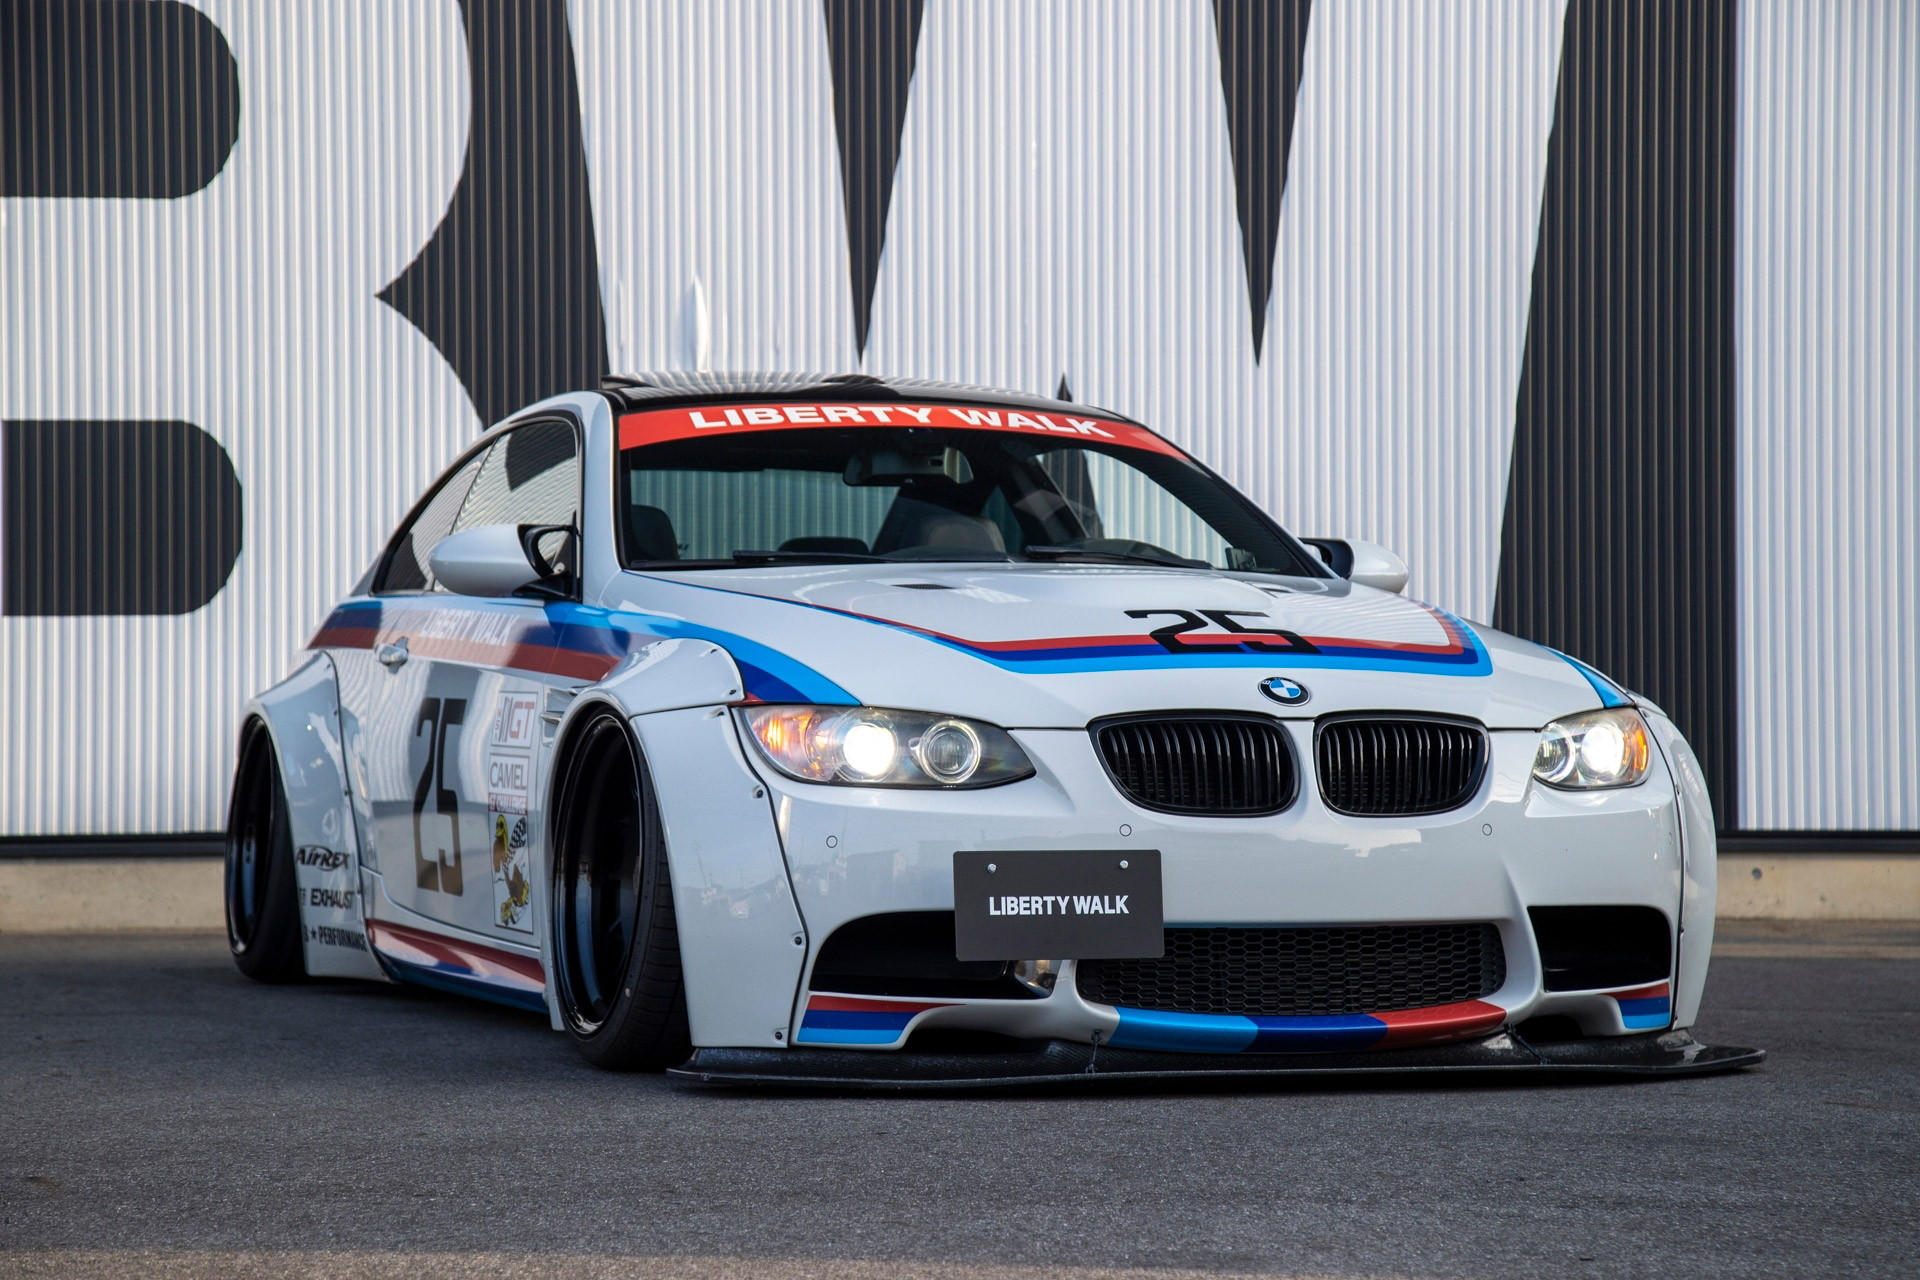 E92 BMW M3 Wants To Be a Racer, Tuner Gaslights It and Lists It for Grabs -  autoevolution